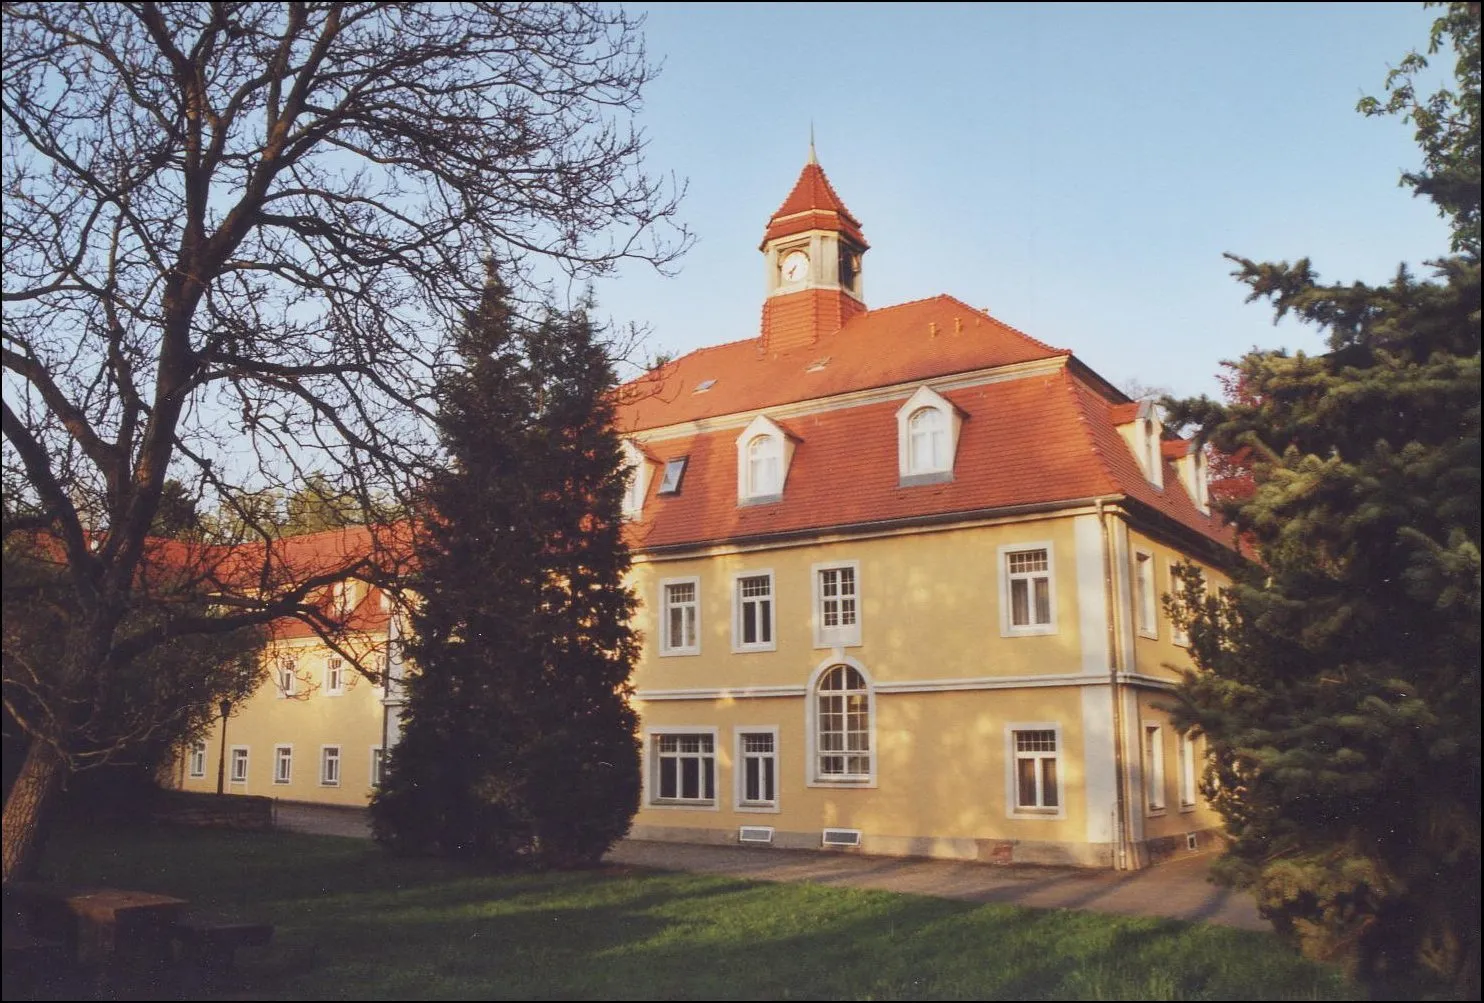 Photo showing: This image shows Friedrichsthal castle in Berggießhübel in Saxony, Germany.